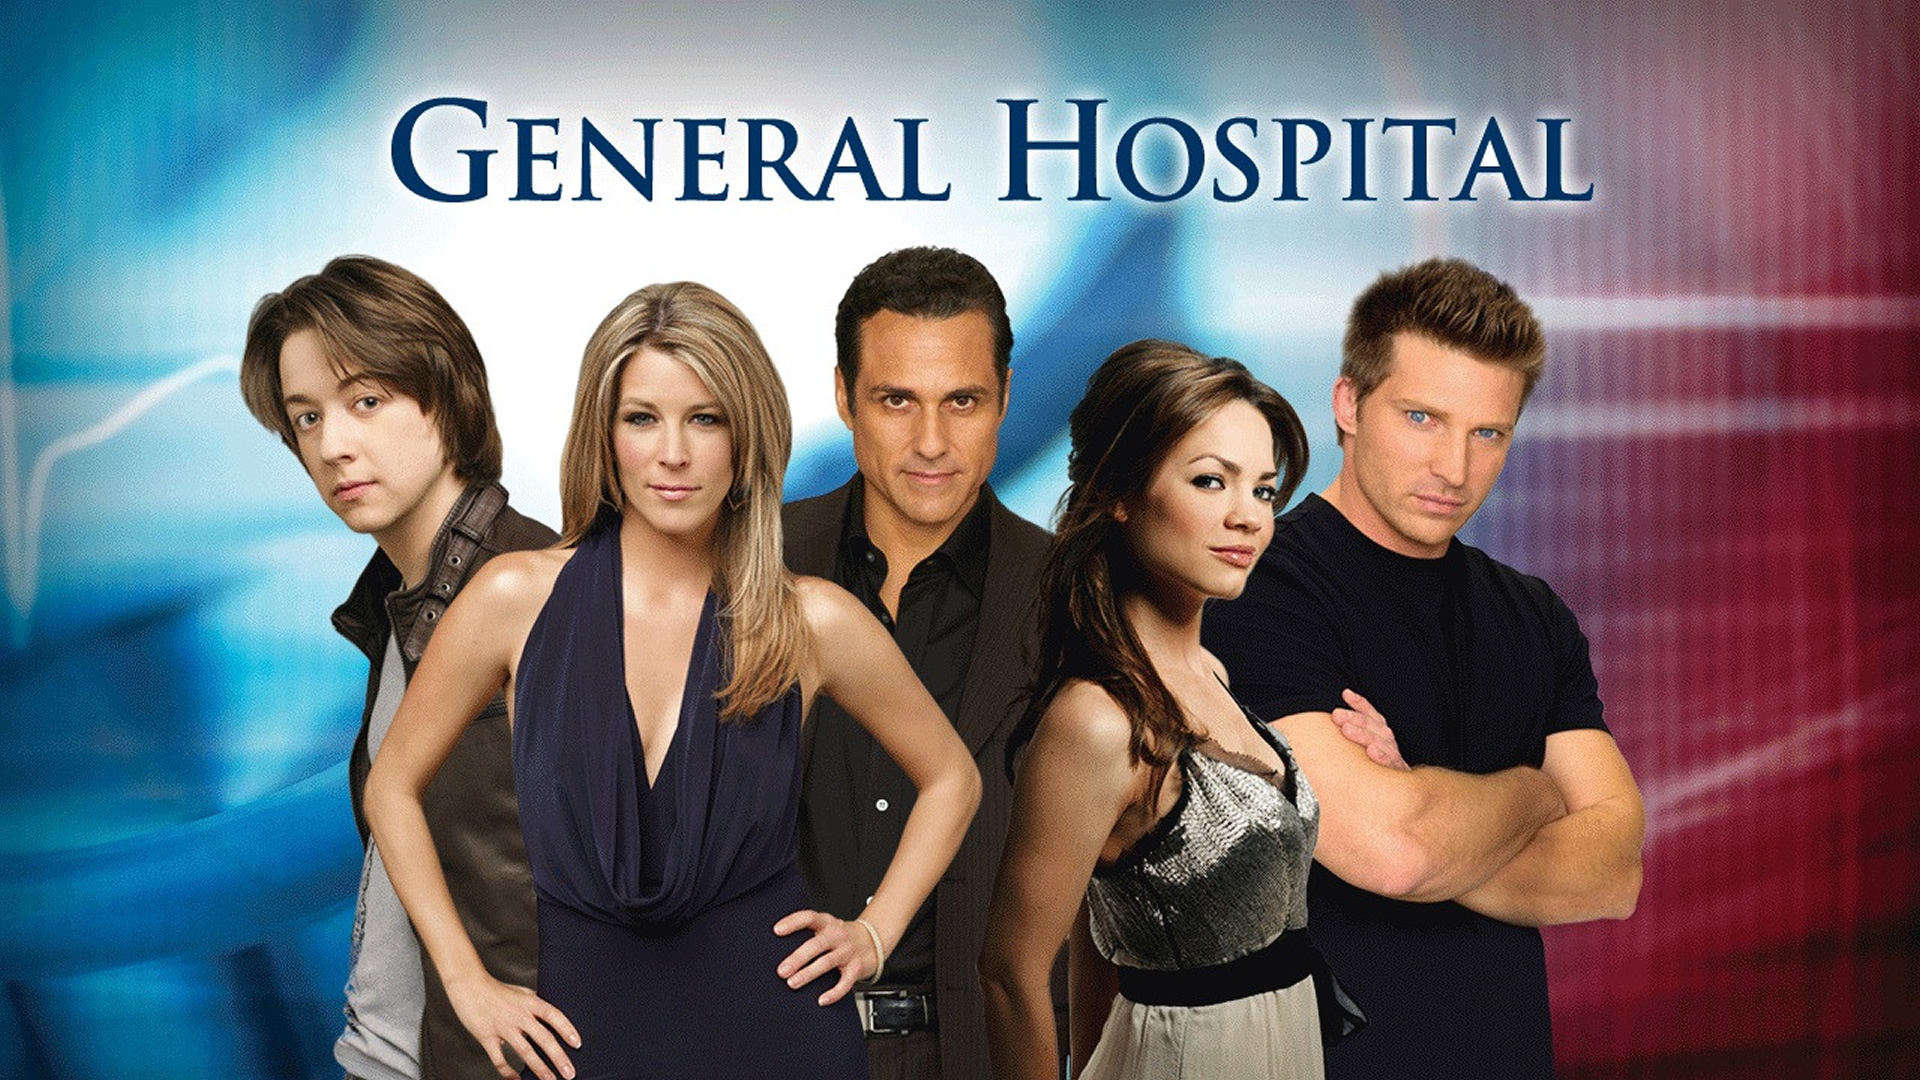 General Hospital Anna Devane Finally Finds Peter August GH Spoilers!